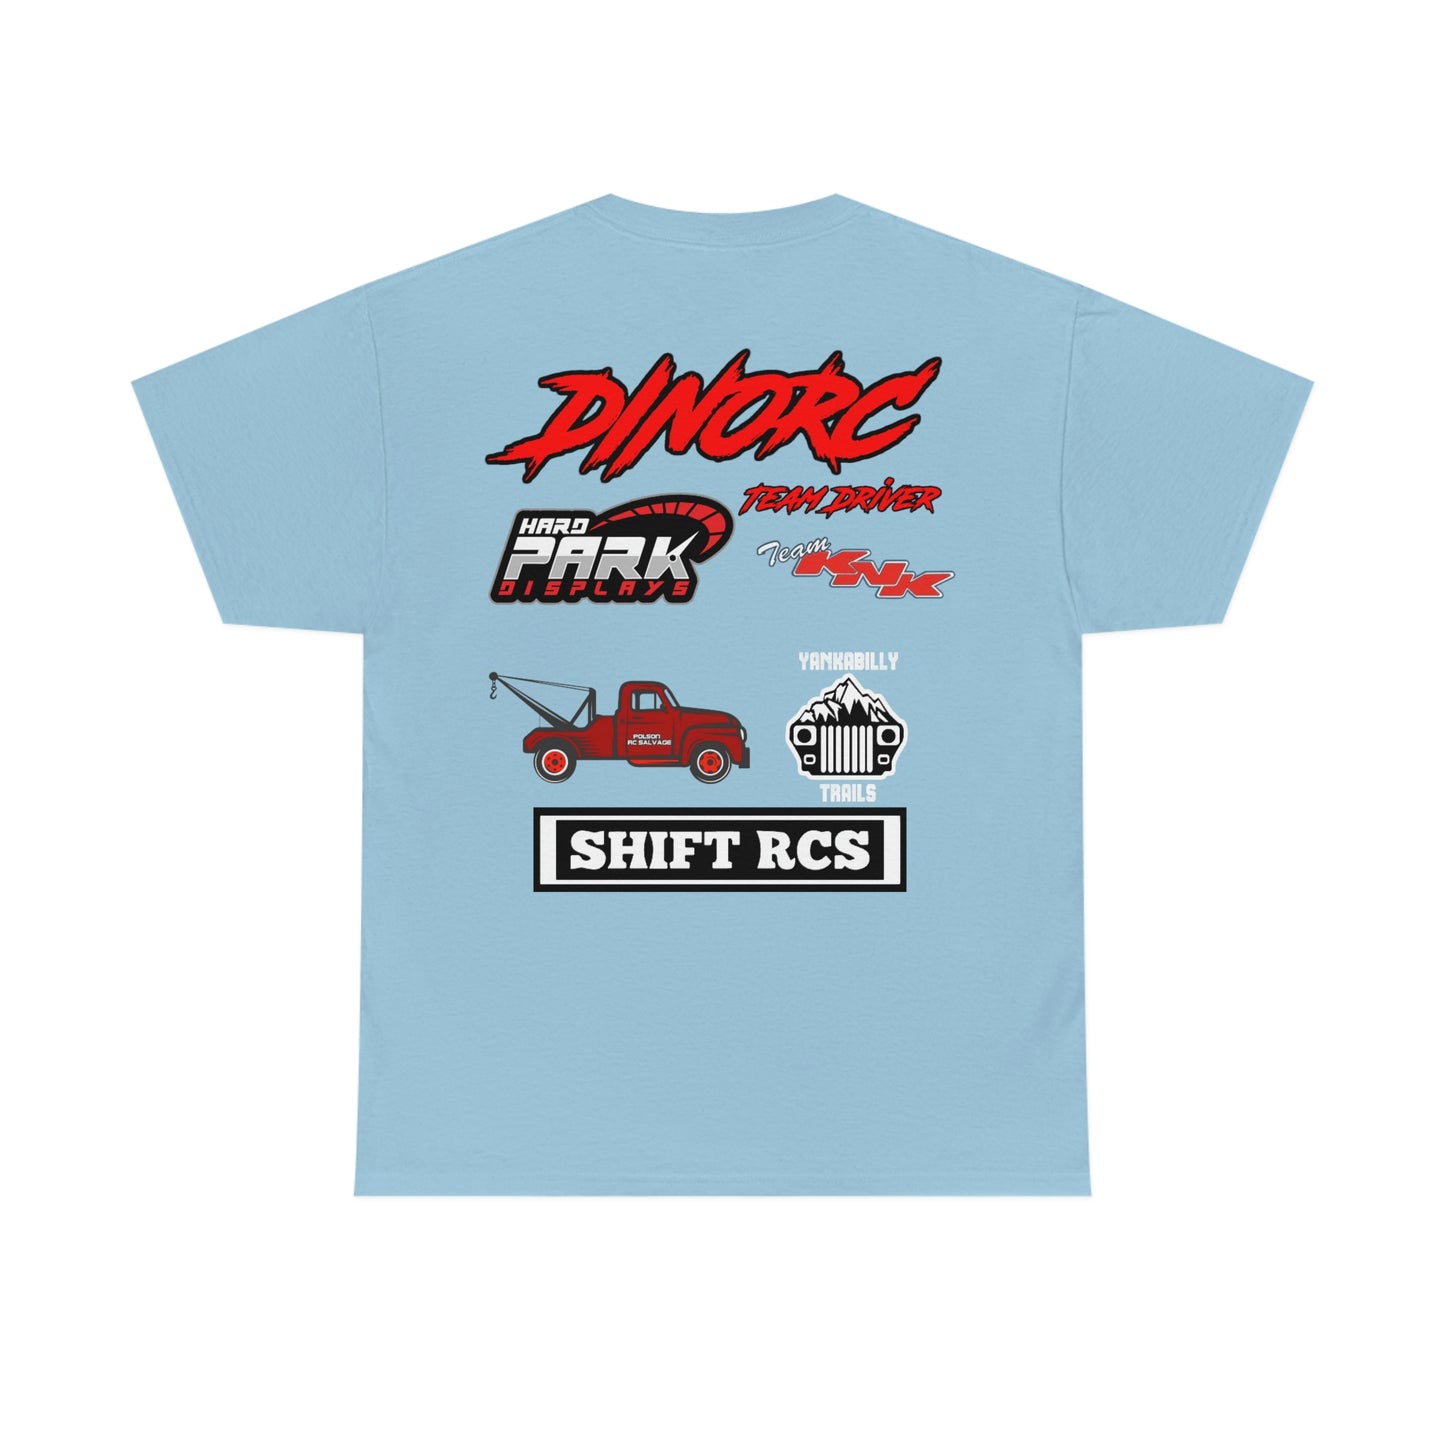 Team Driver Todd Sizelove truck logo Front and Back DinoRc Logo T-Shirt S-5x 5 colors